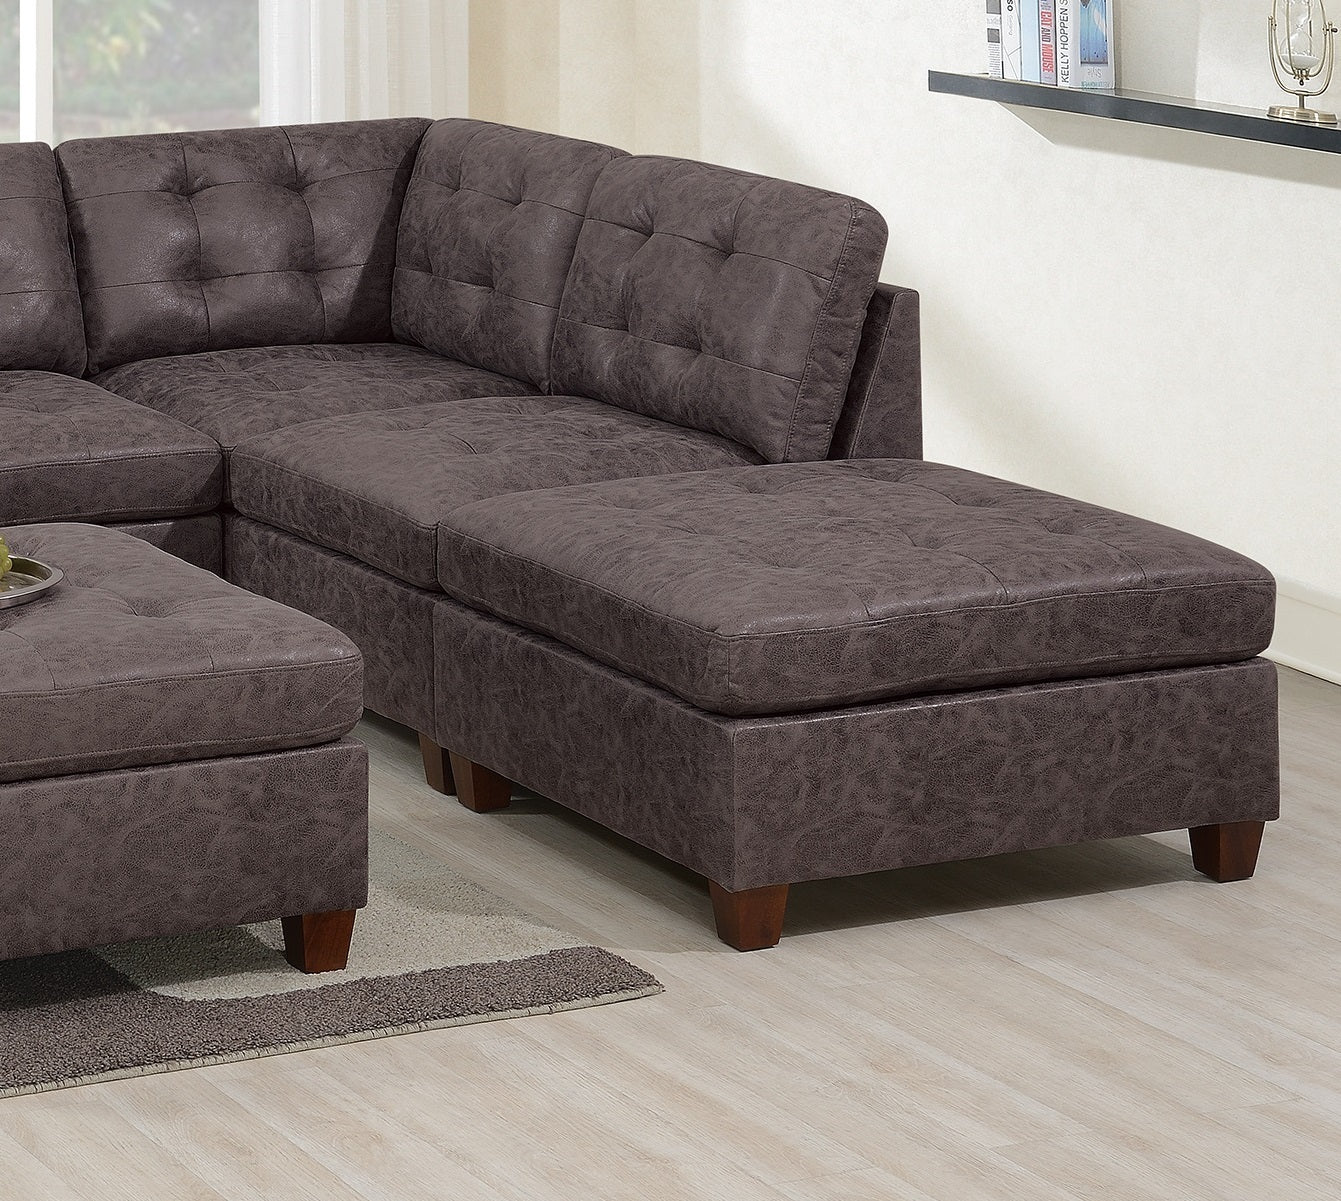 Living Room Furniture Tufted Armless Chair Dark Brown dark brown-primary living